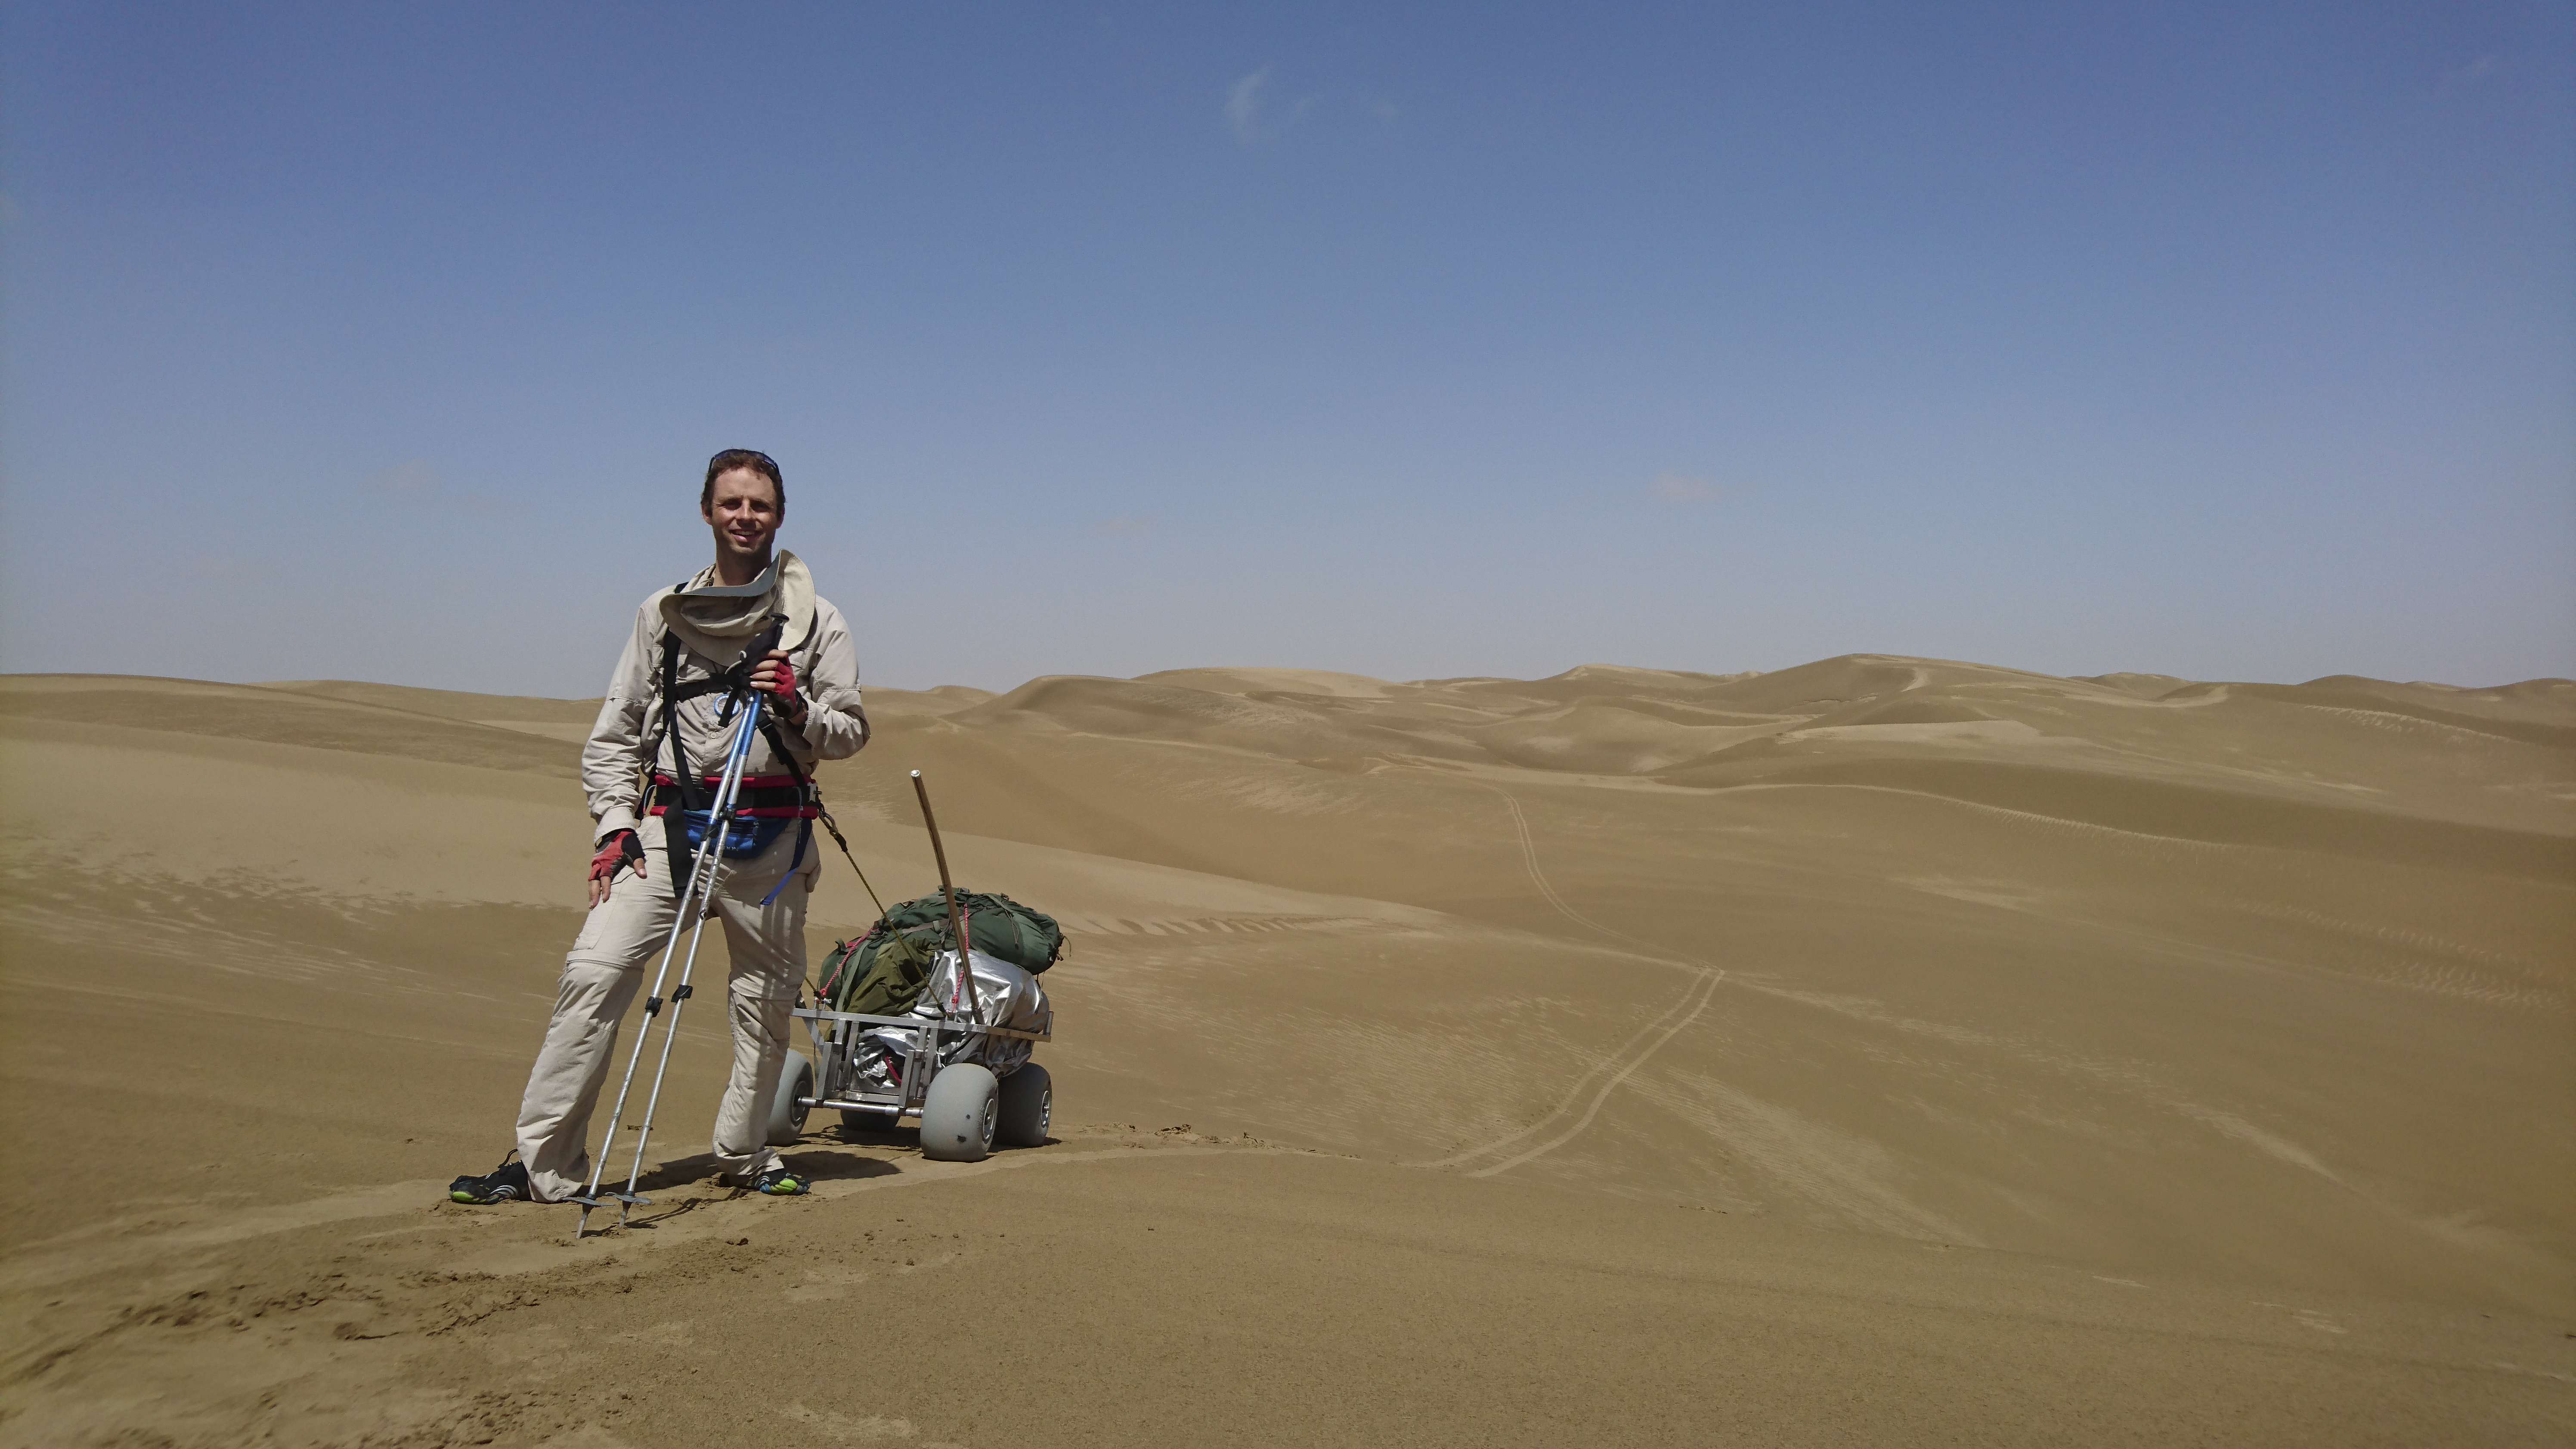 Rob Lilwall with his cart on a reconnaissance trip in Taklamakan, Xinjiang province.